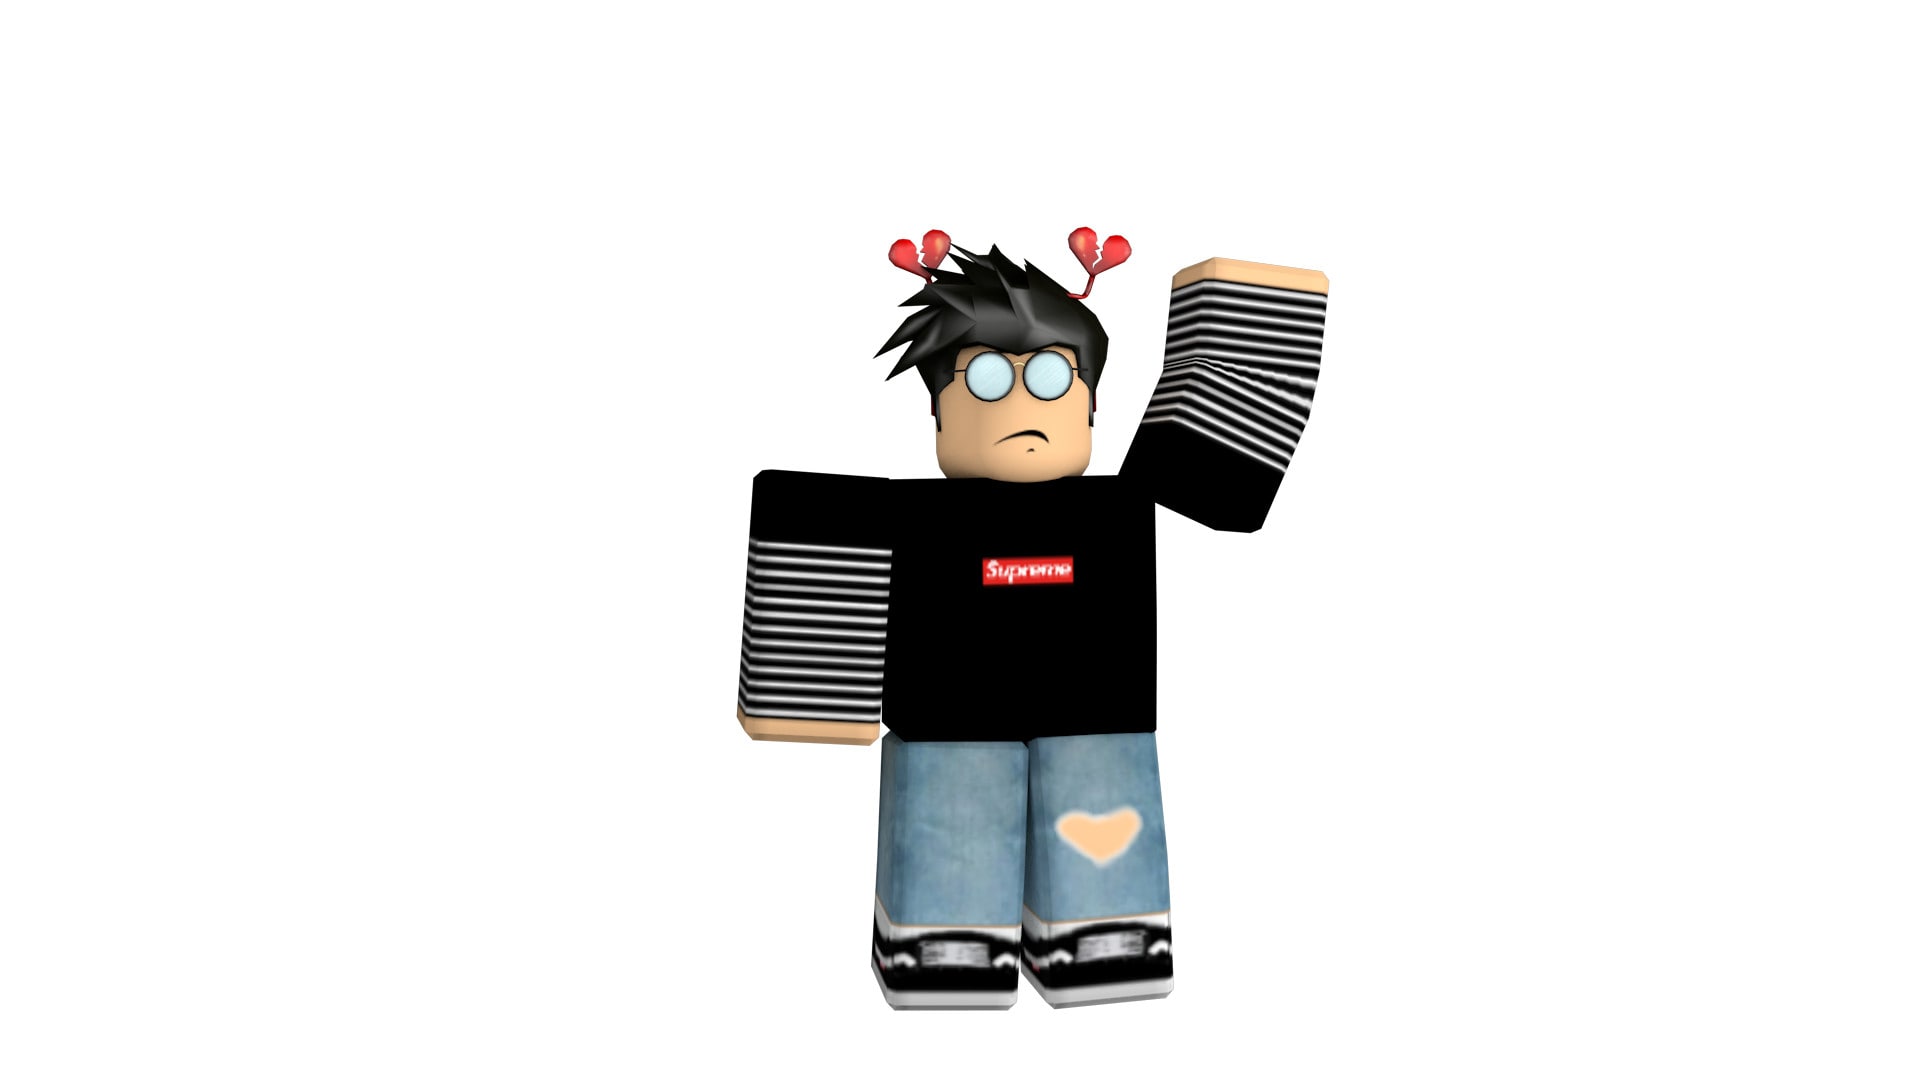 Get Your Own Roblox Gfx By Fruitymoon